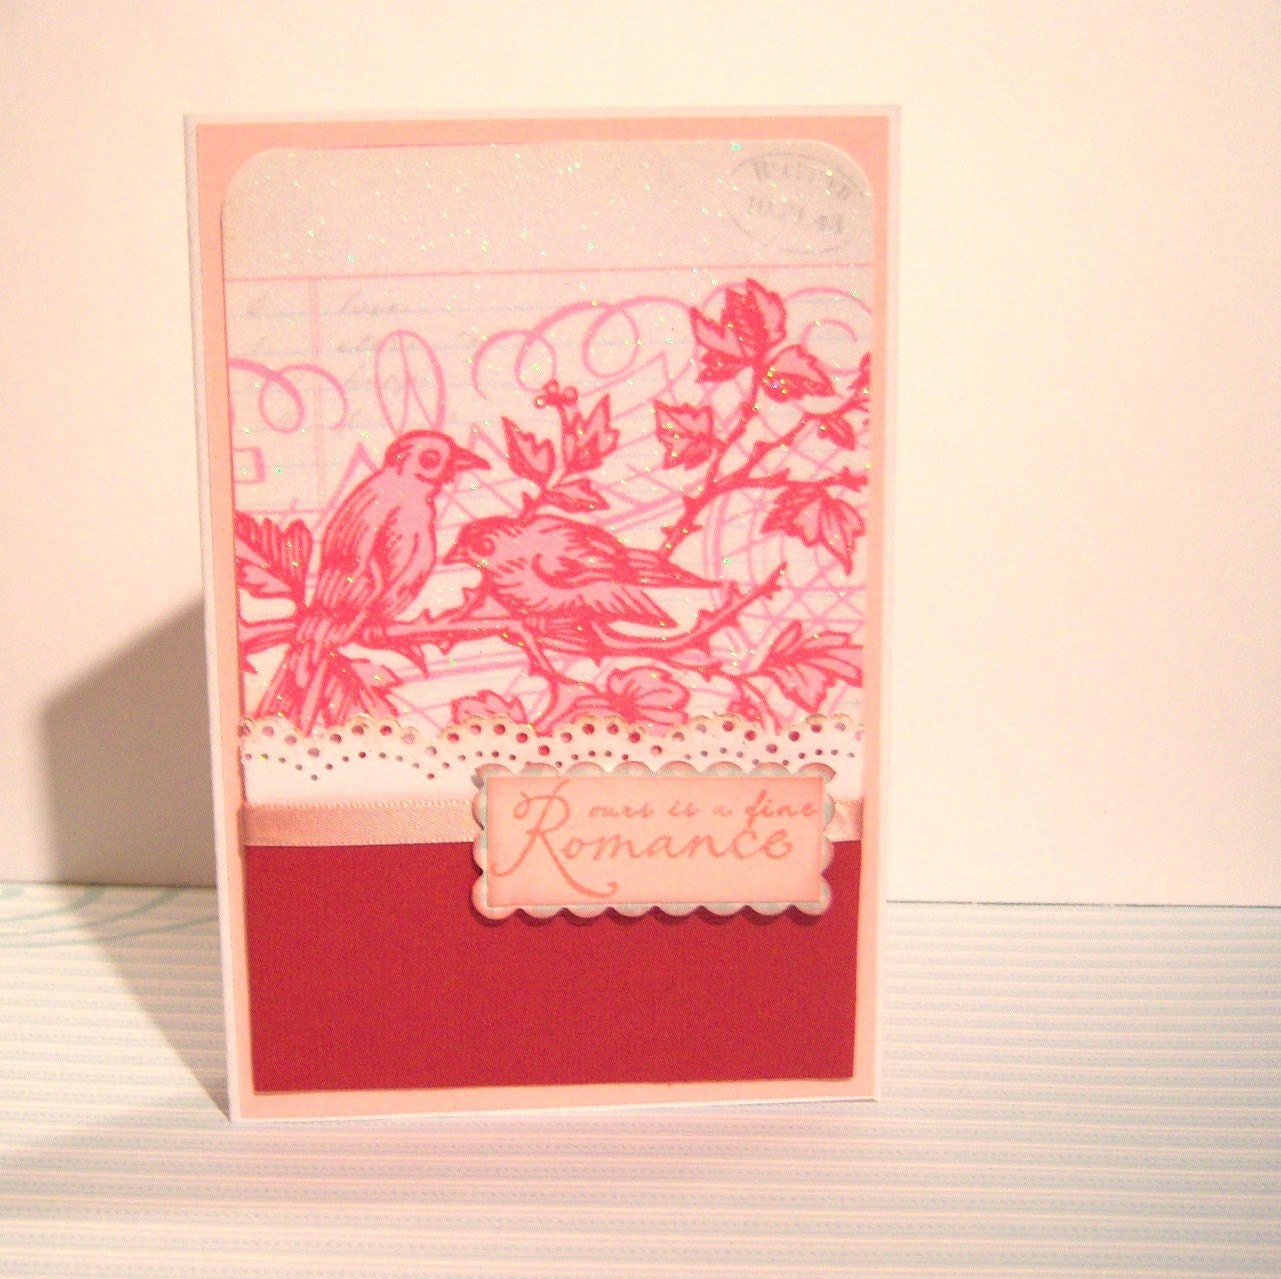 Ours is a Fine Romance Pink Love Handmade Greeting Card